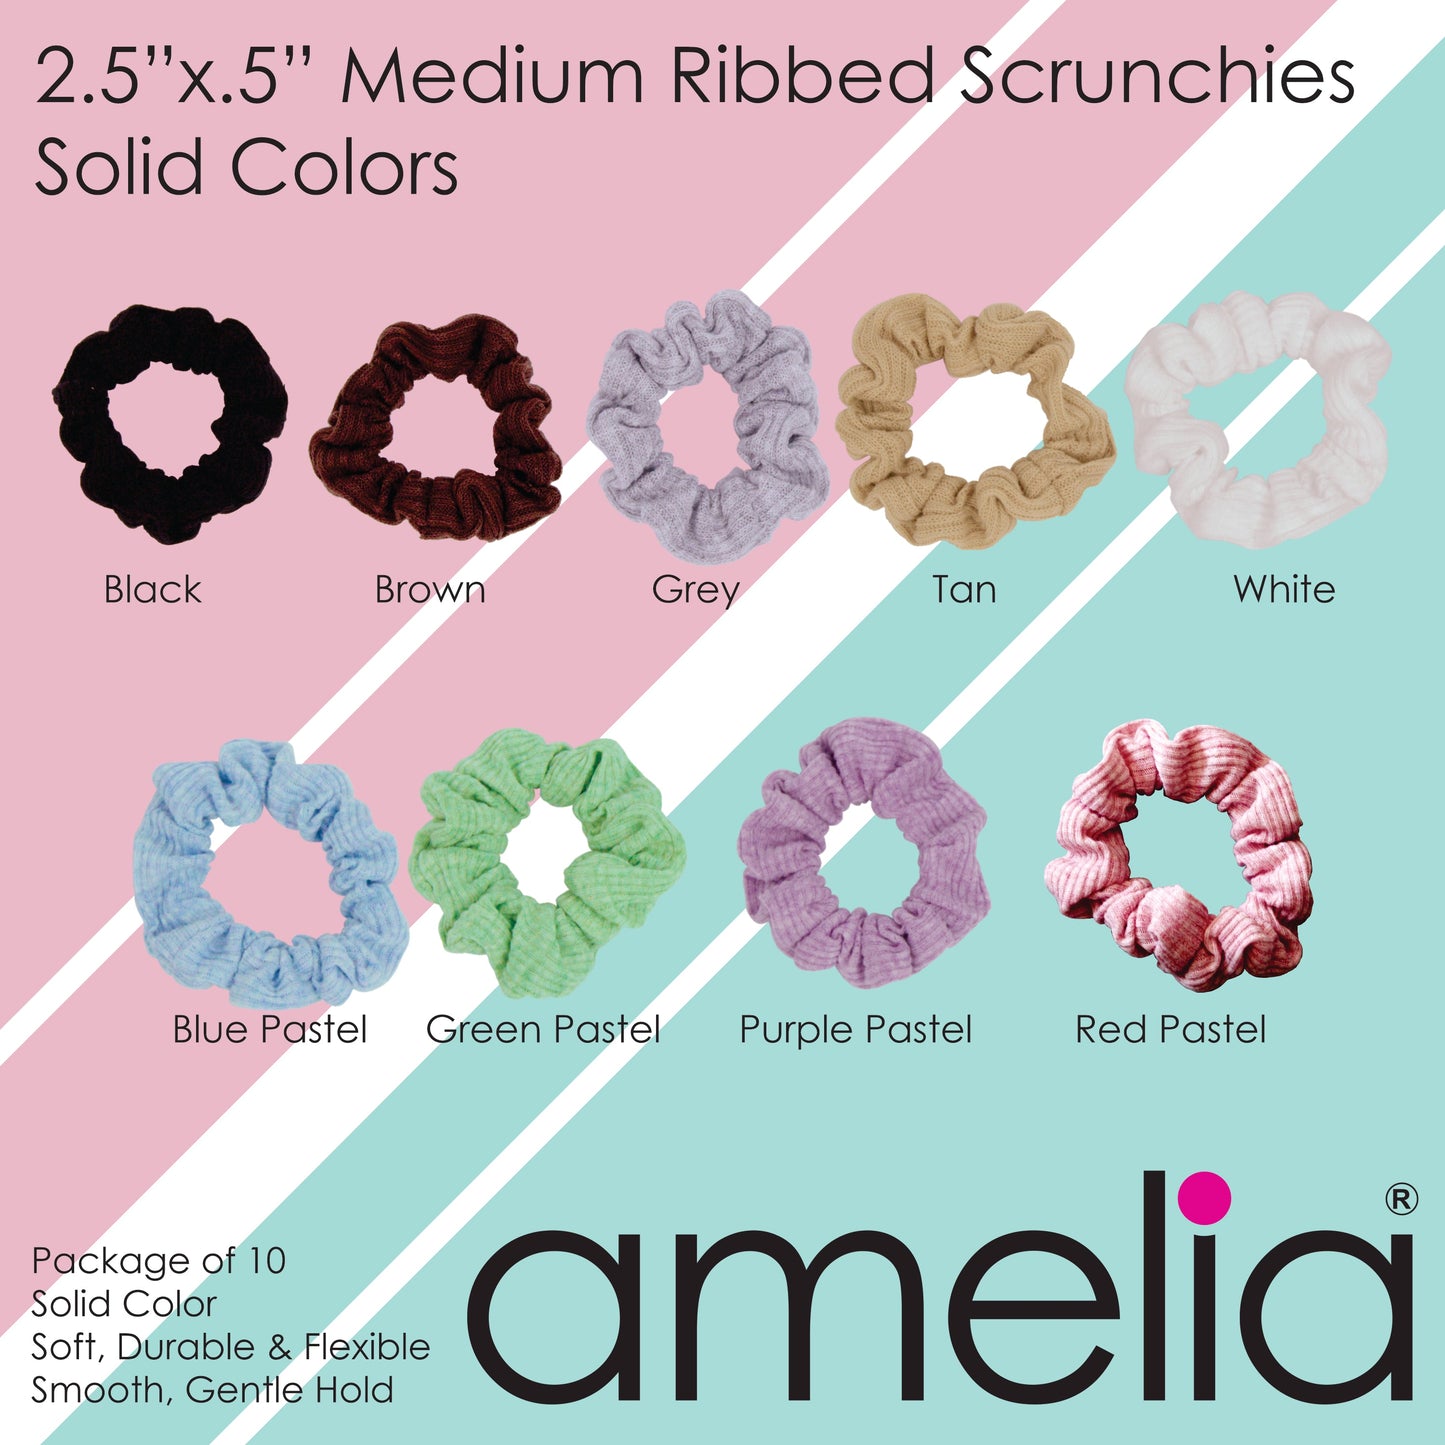 Amelia Beauty, Medium Earth Tones Ribbed Scrunchies, 2.5in Diameter, Gentle on Hair, Strong Hold, No Snag, No Dents or Creases. 10 Pack